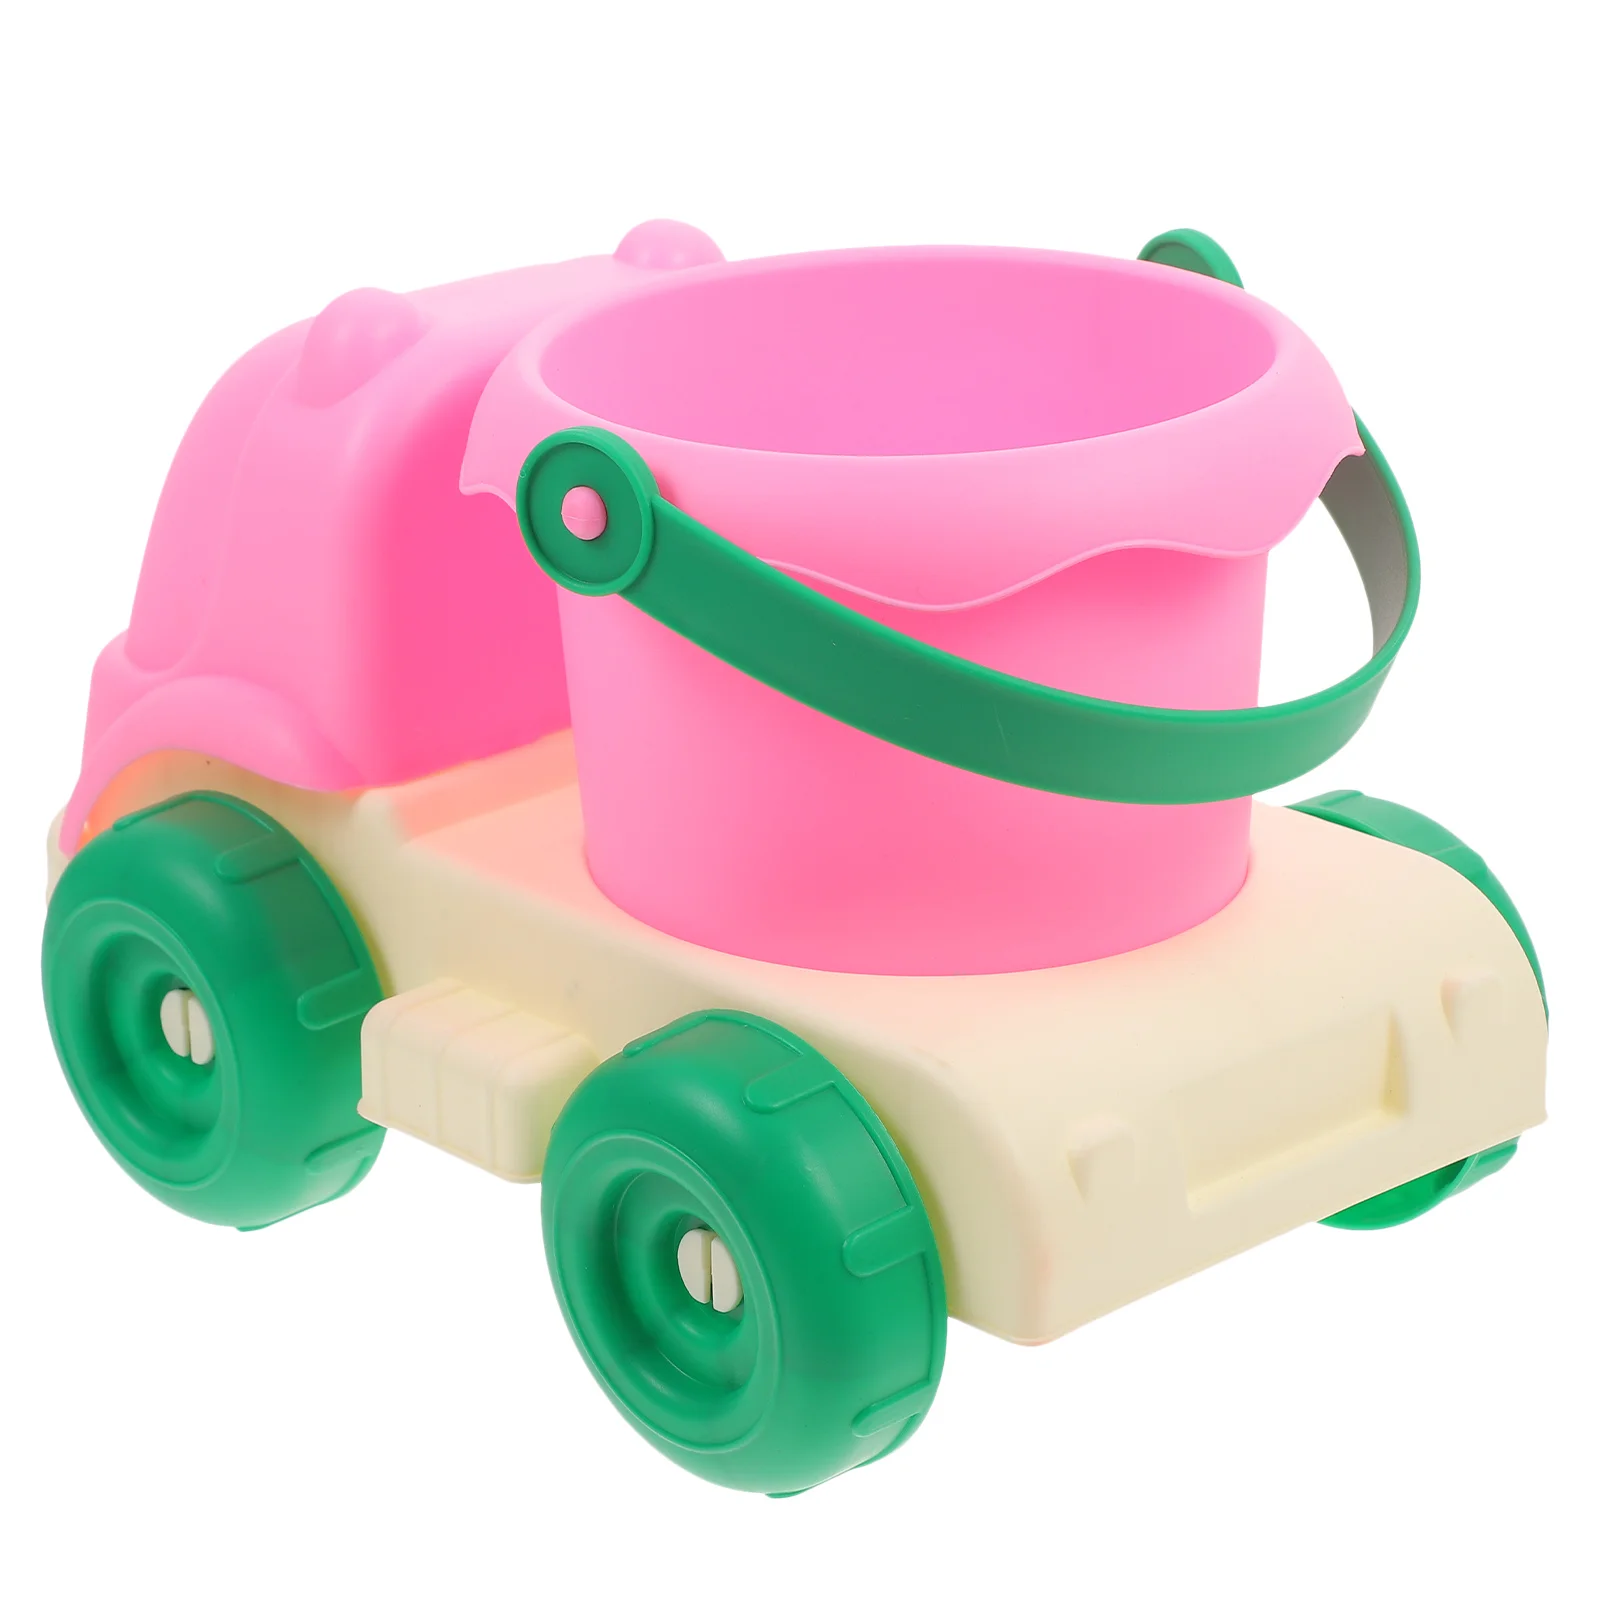 

Beach Toy Car Toys for Kids Small Sand Bucket Truck Body The Outdoor Soft Rubber Multi-use Buckets